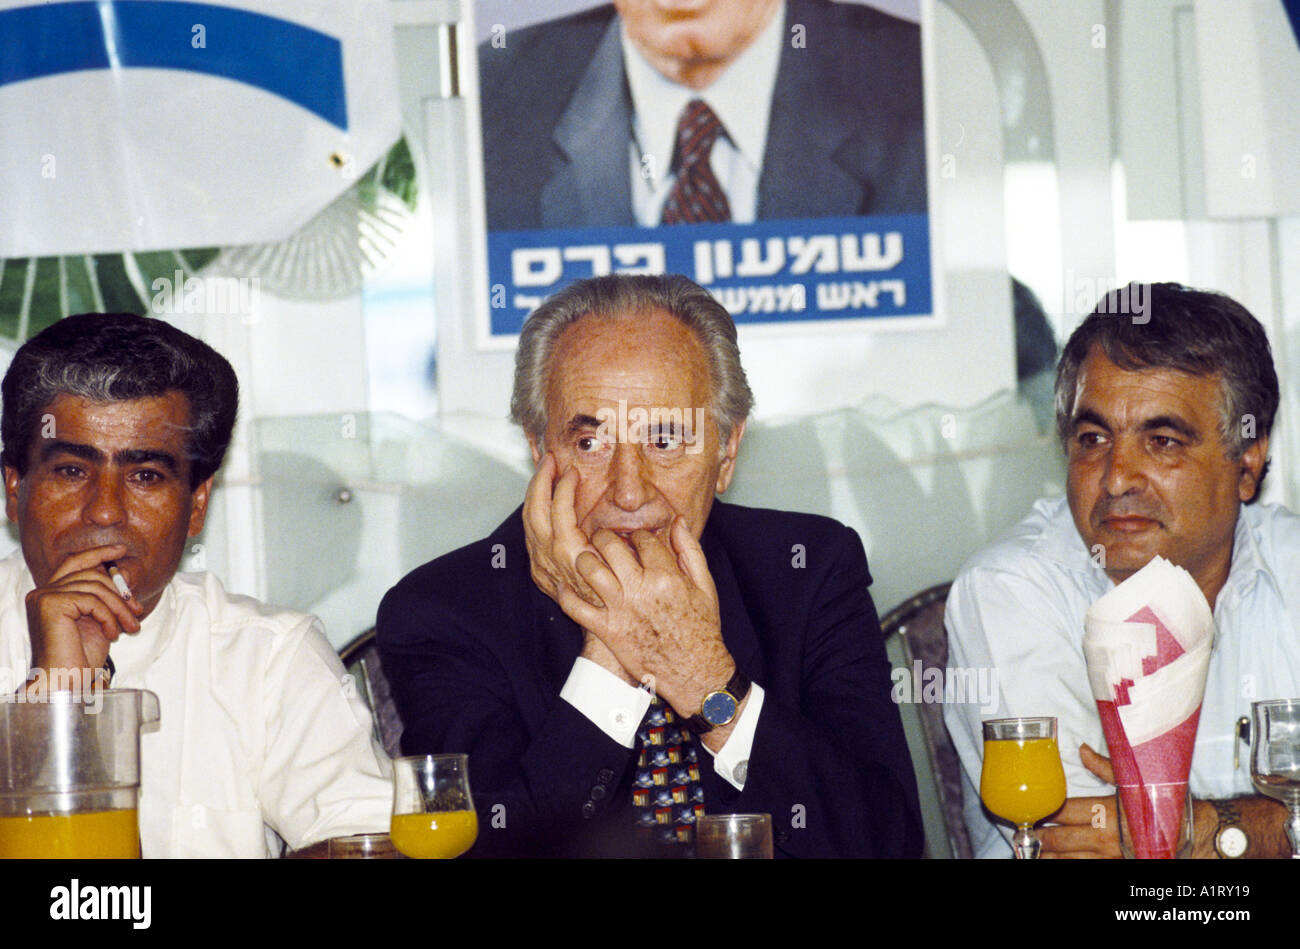 ISRAELI ELECTIONS MAY 1996 LABOUR LEADER SHIMON PERES 1996 Stock Photo